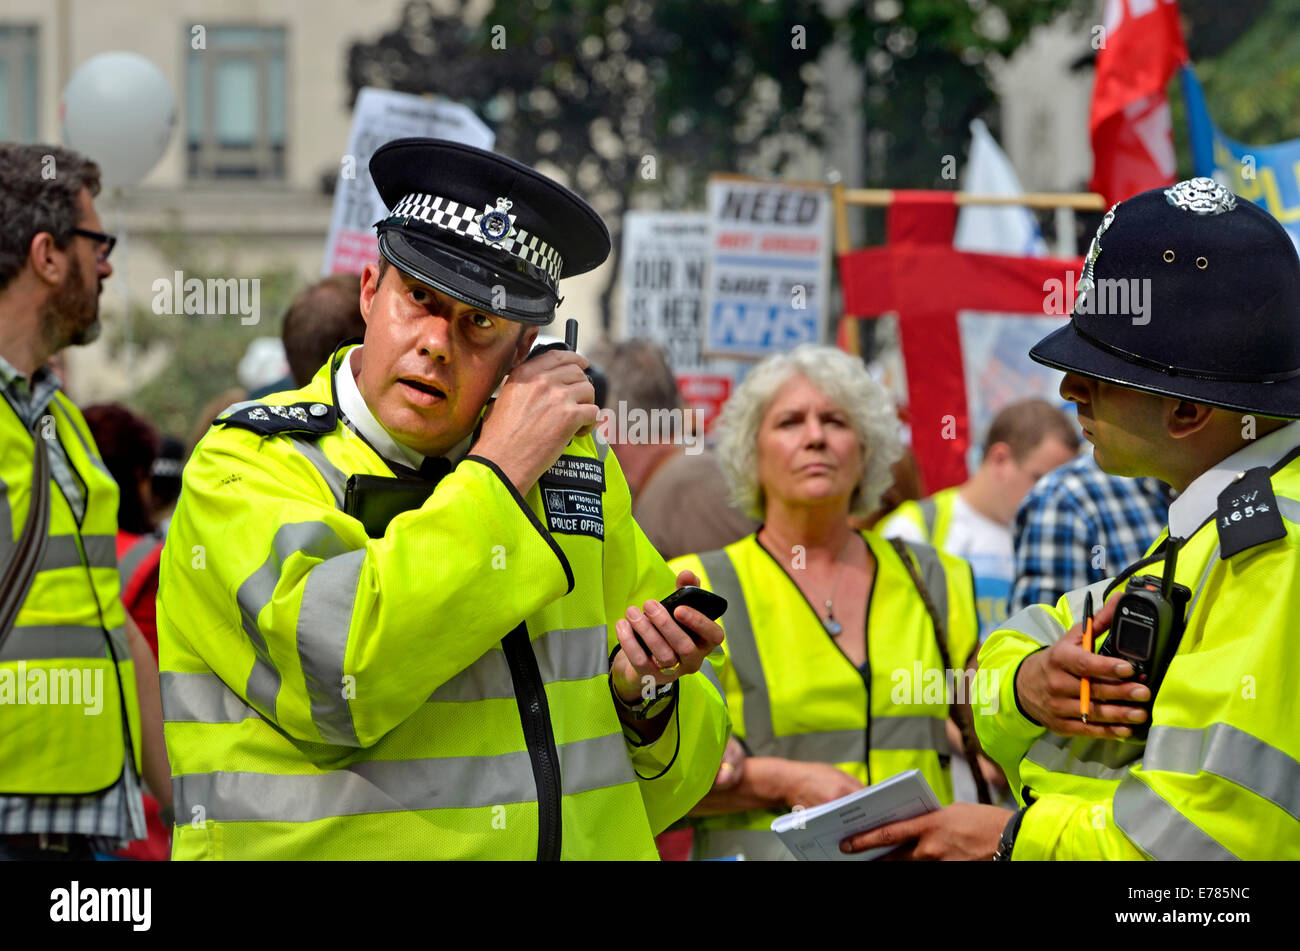 London, England, UK. Metropolitan Police officers at the People's march for the NHS, London, 2014 Stock Photo